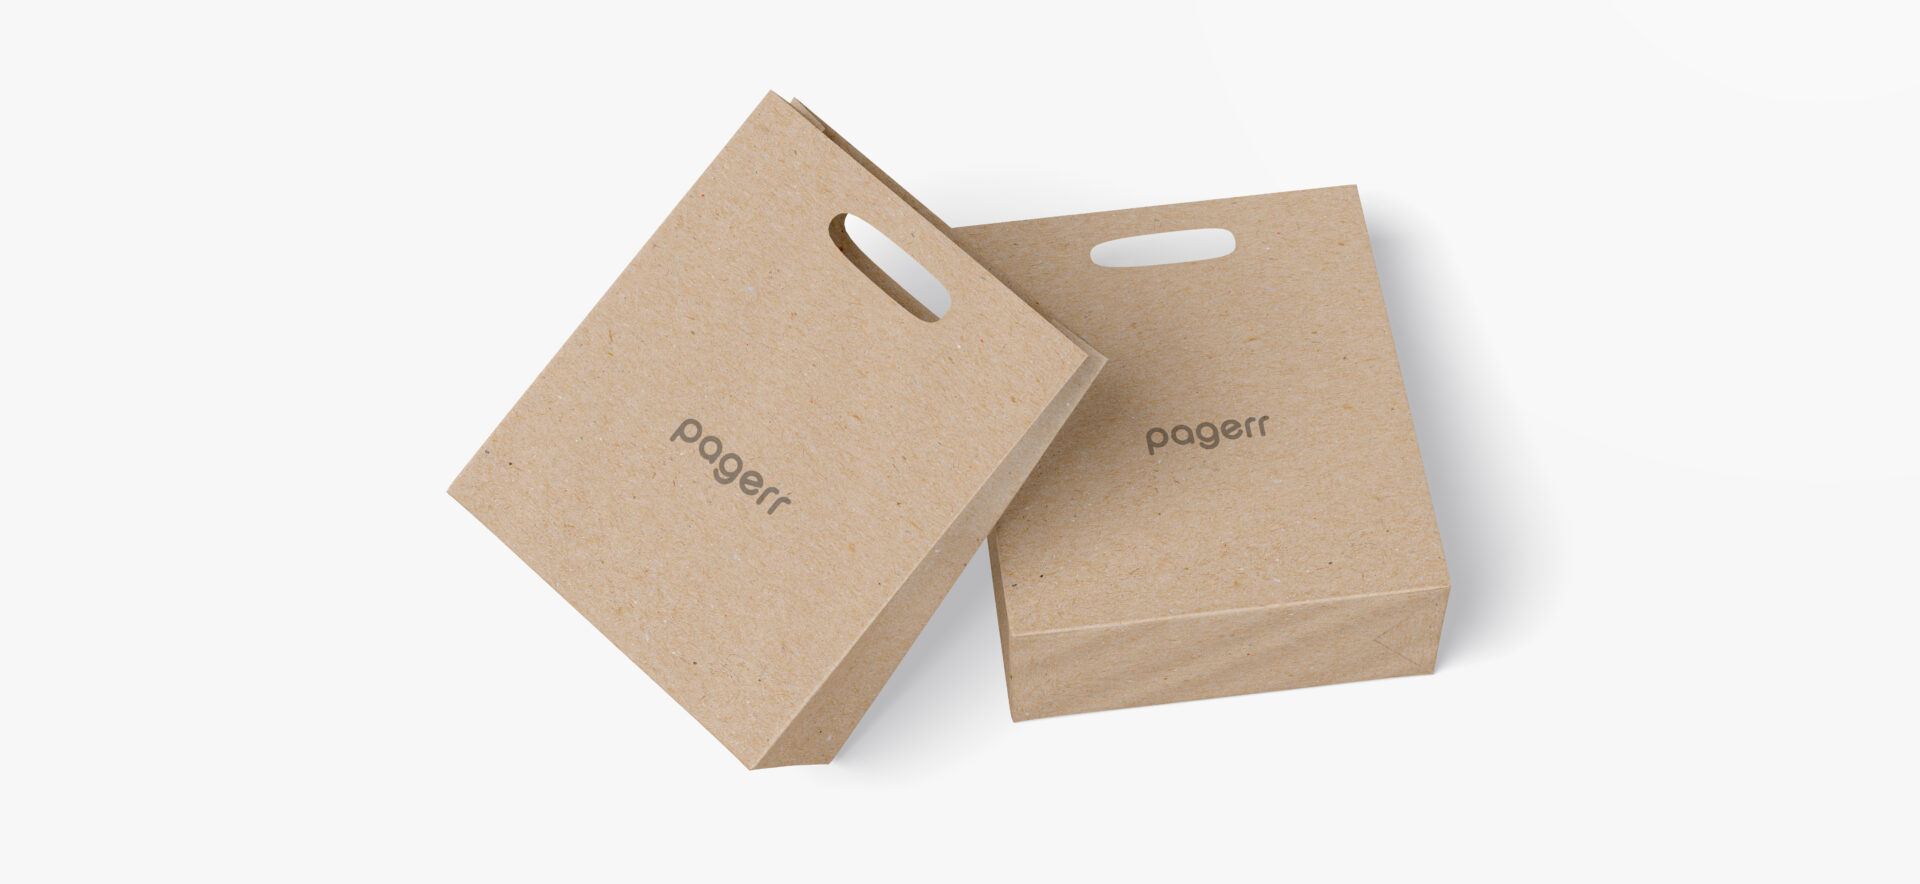 Takeaway bags in Warsaw - Print with Pagerr